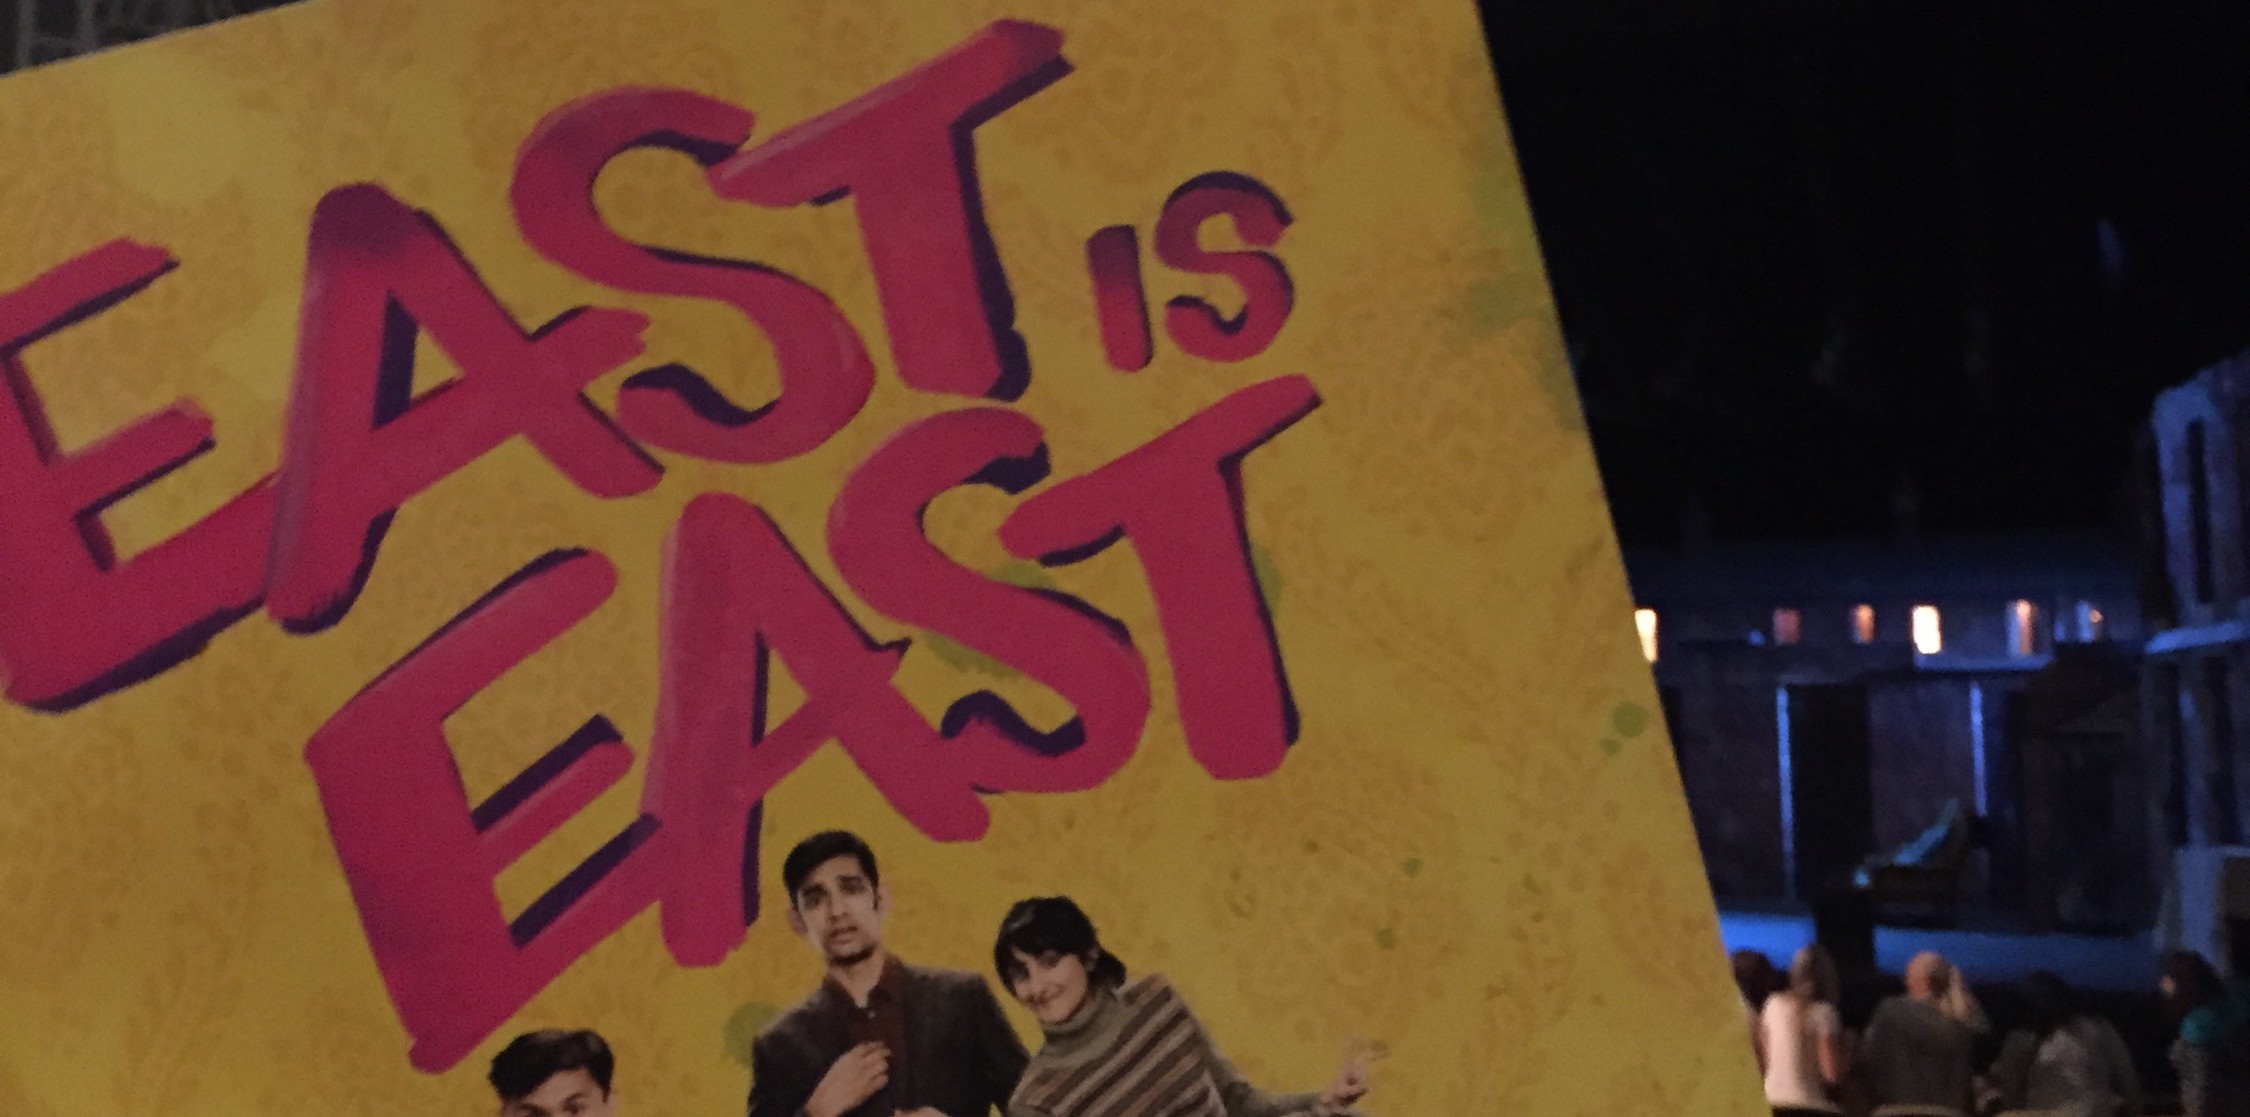 East is East Theatre Review 